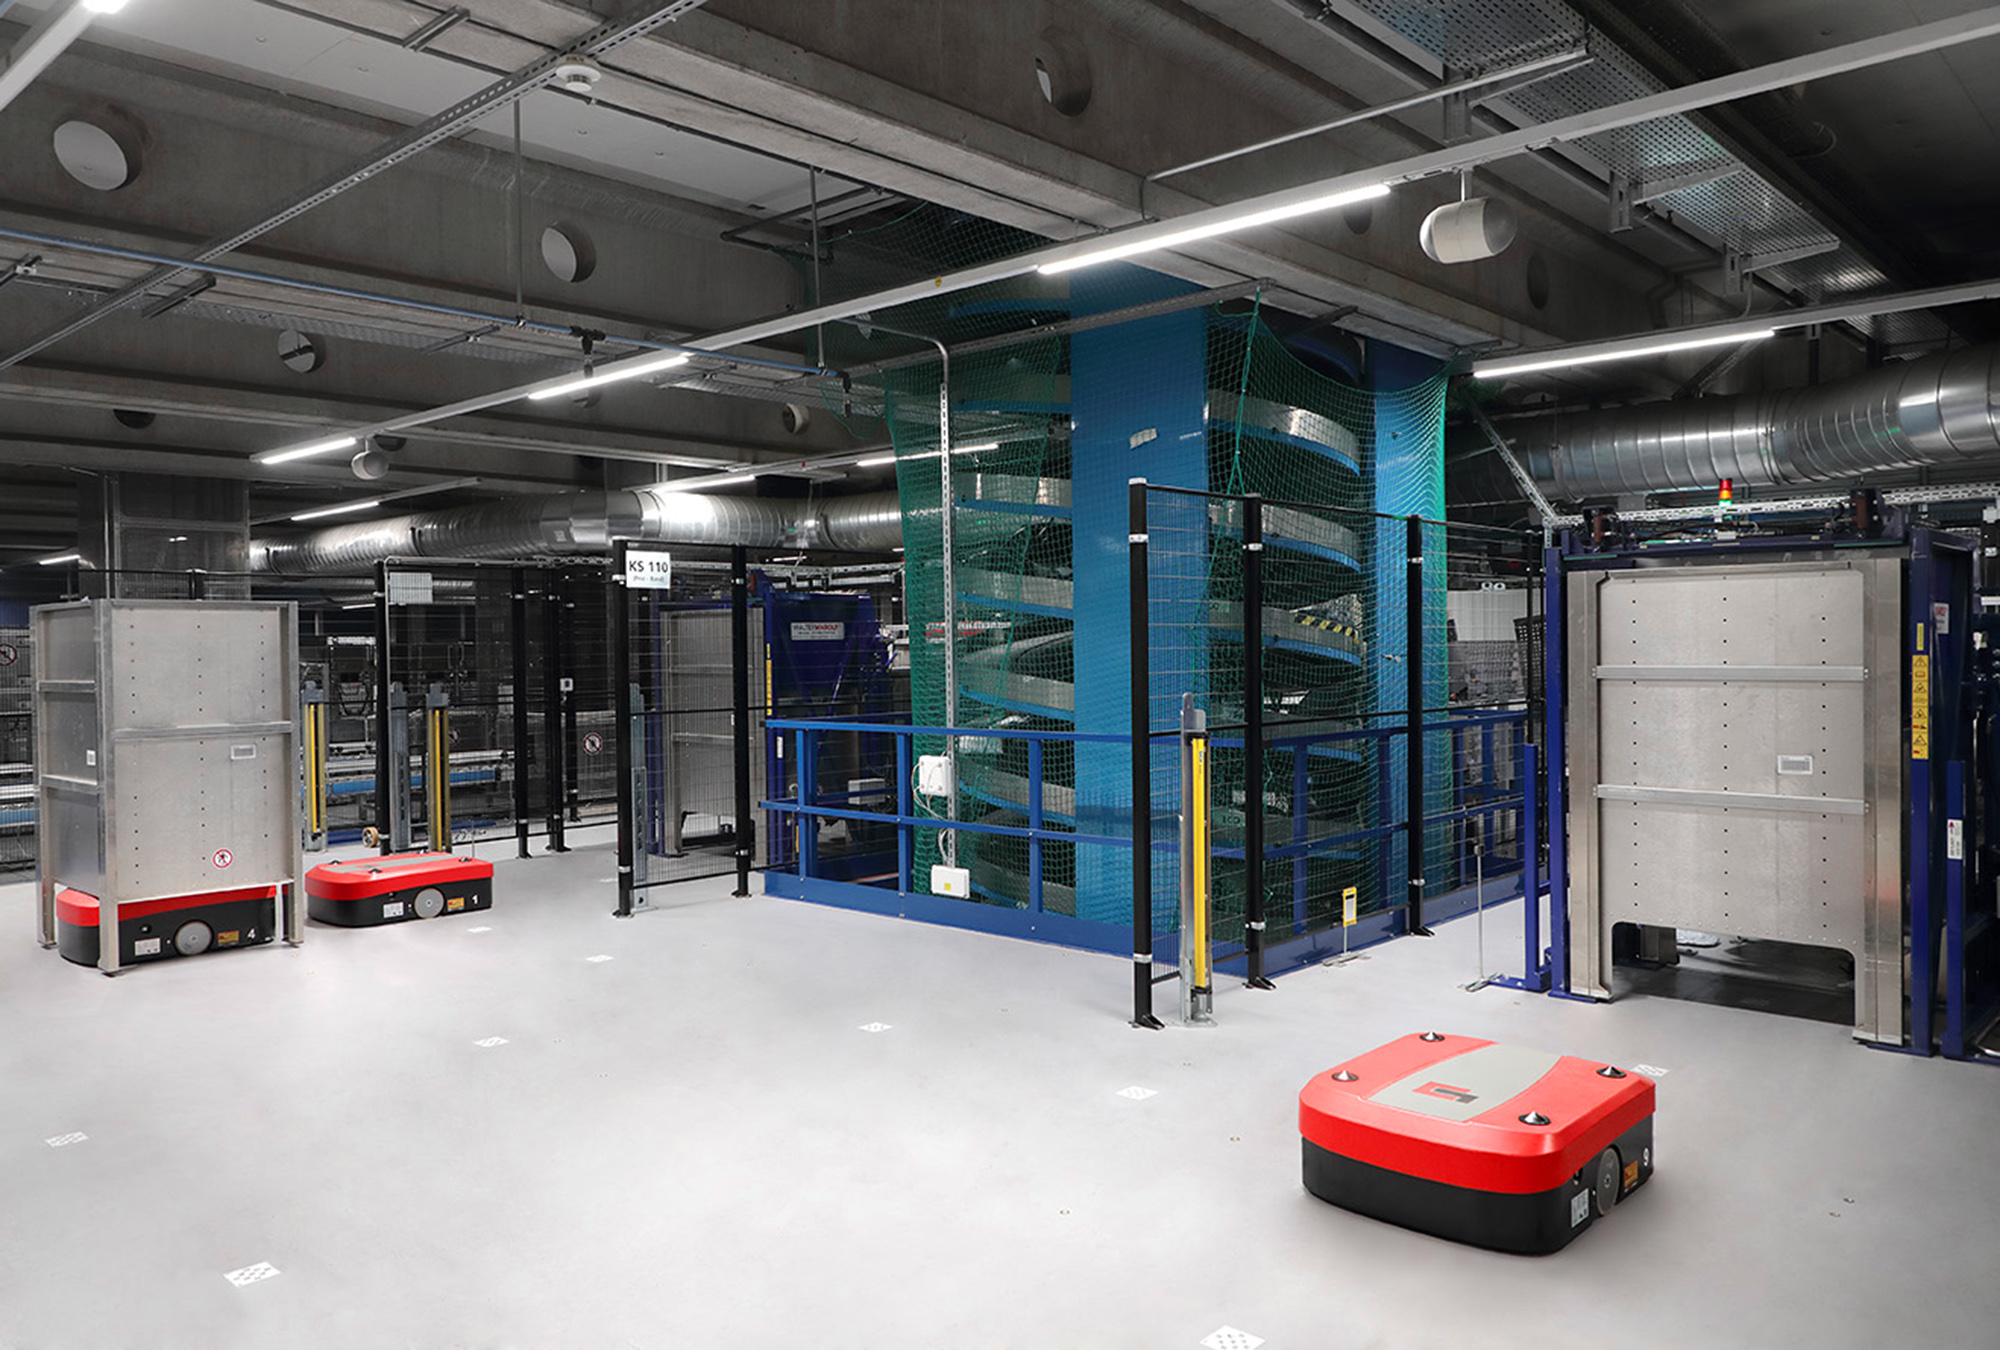 Automated guided vehicles transport boxes